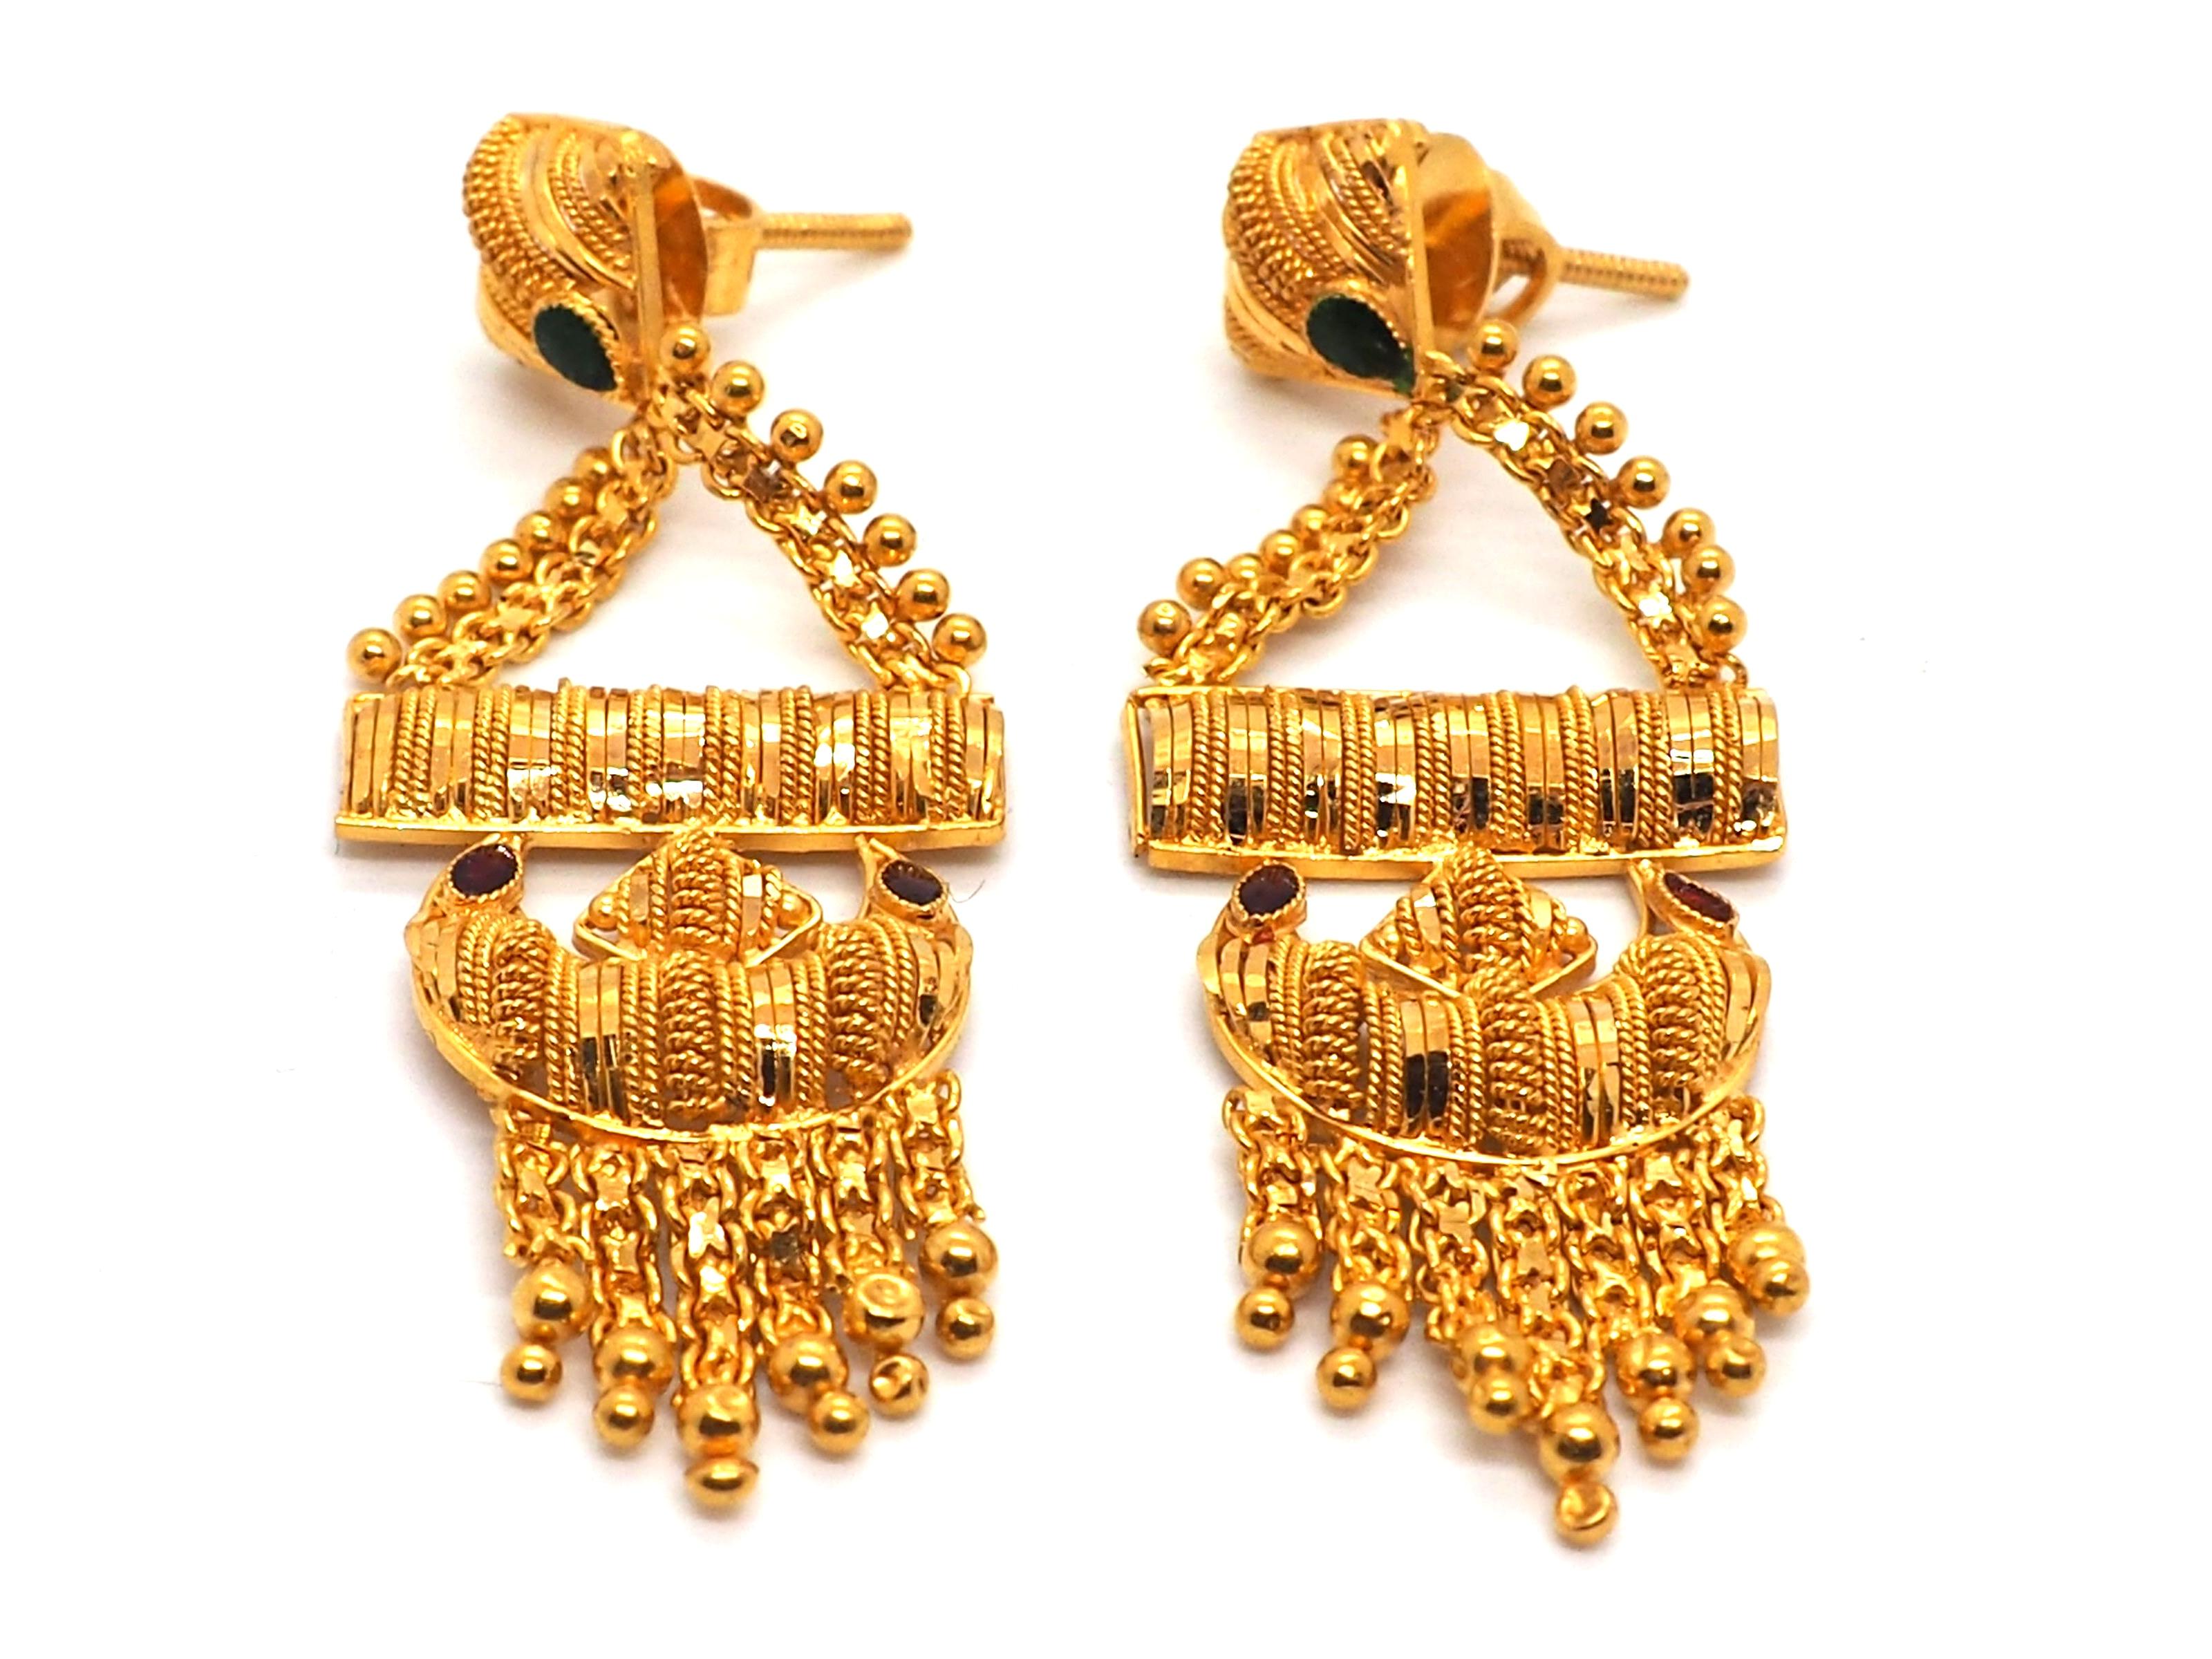 Anglo-Indian Indian Style 21K Gold Chandelier Earrings For Sale